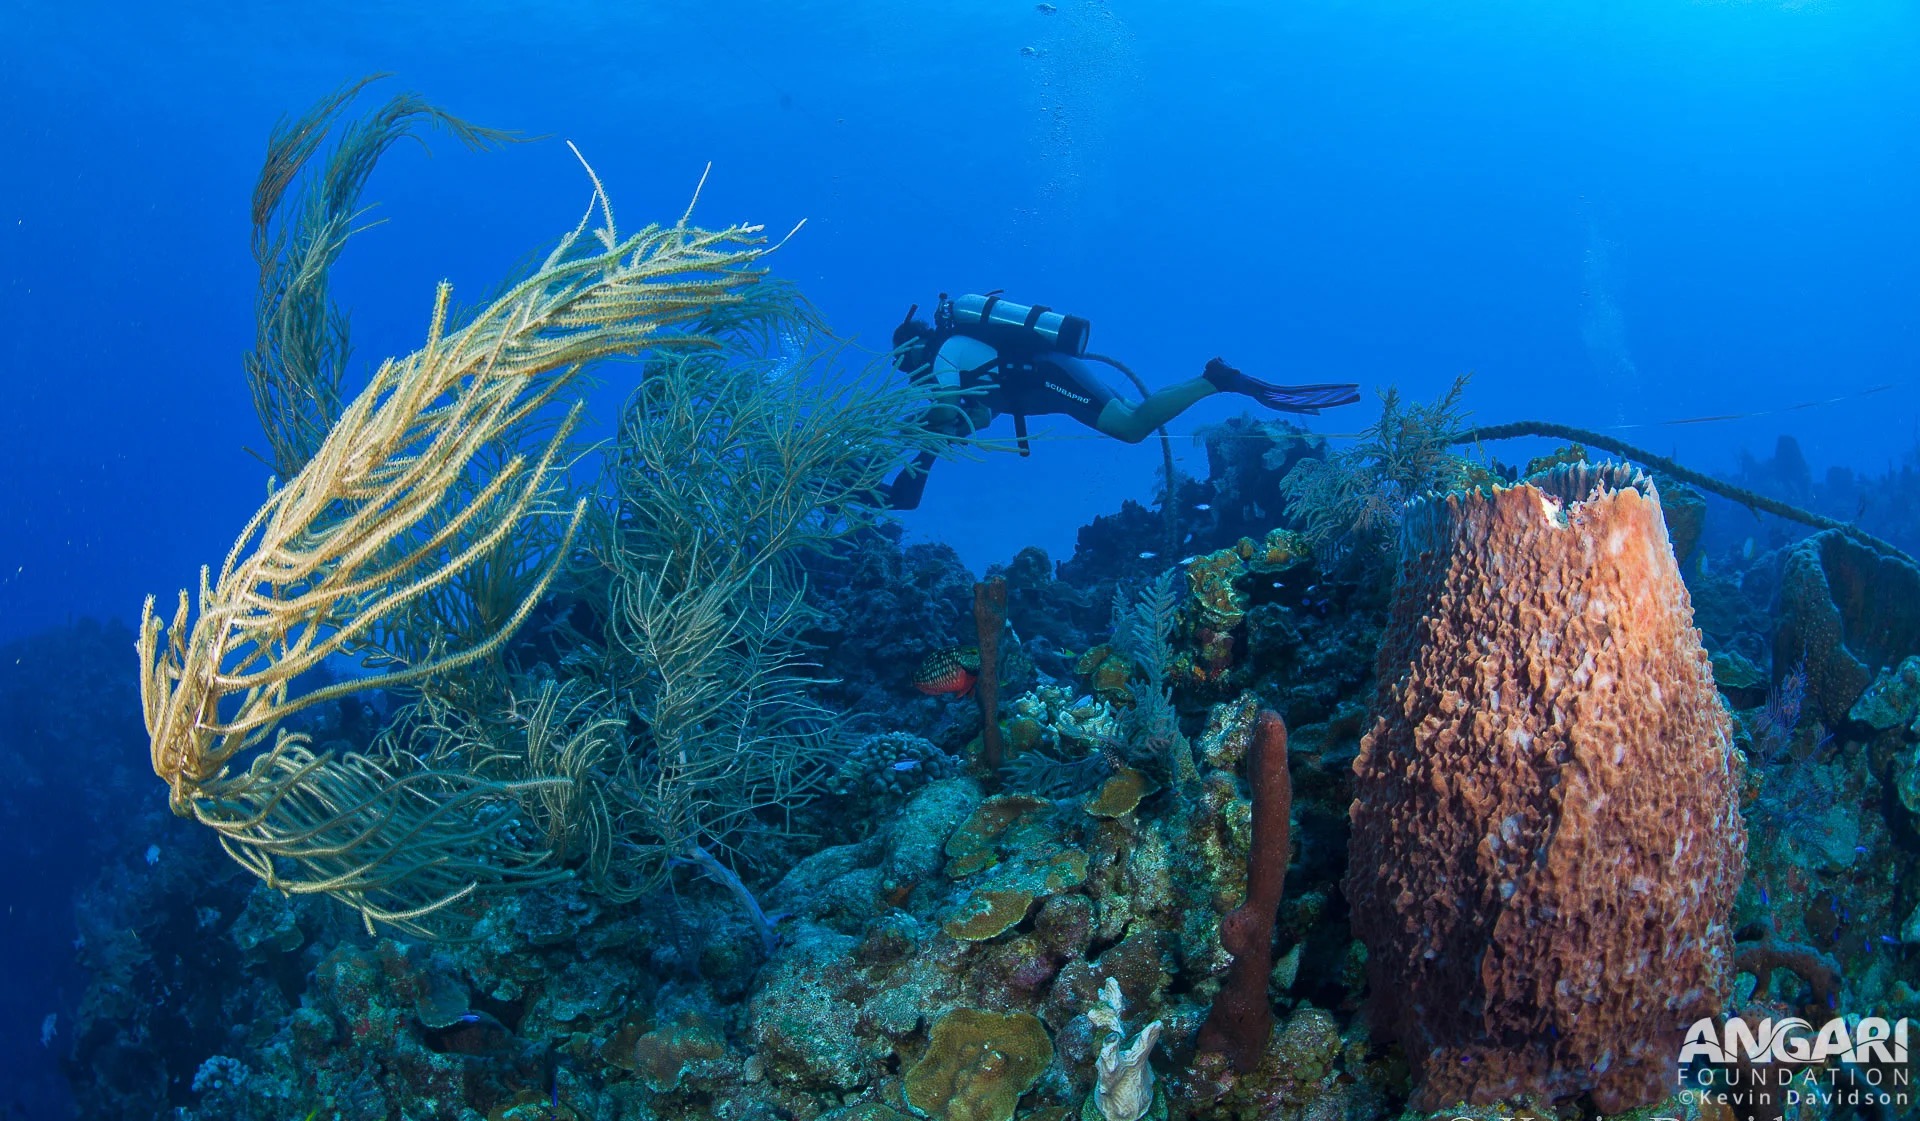 Giant barrel sponges on a coral reef.